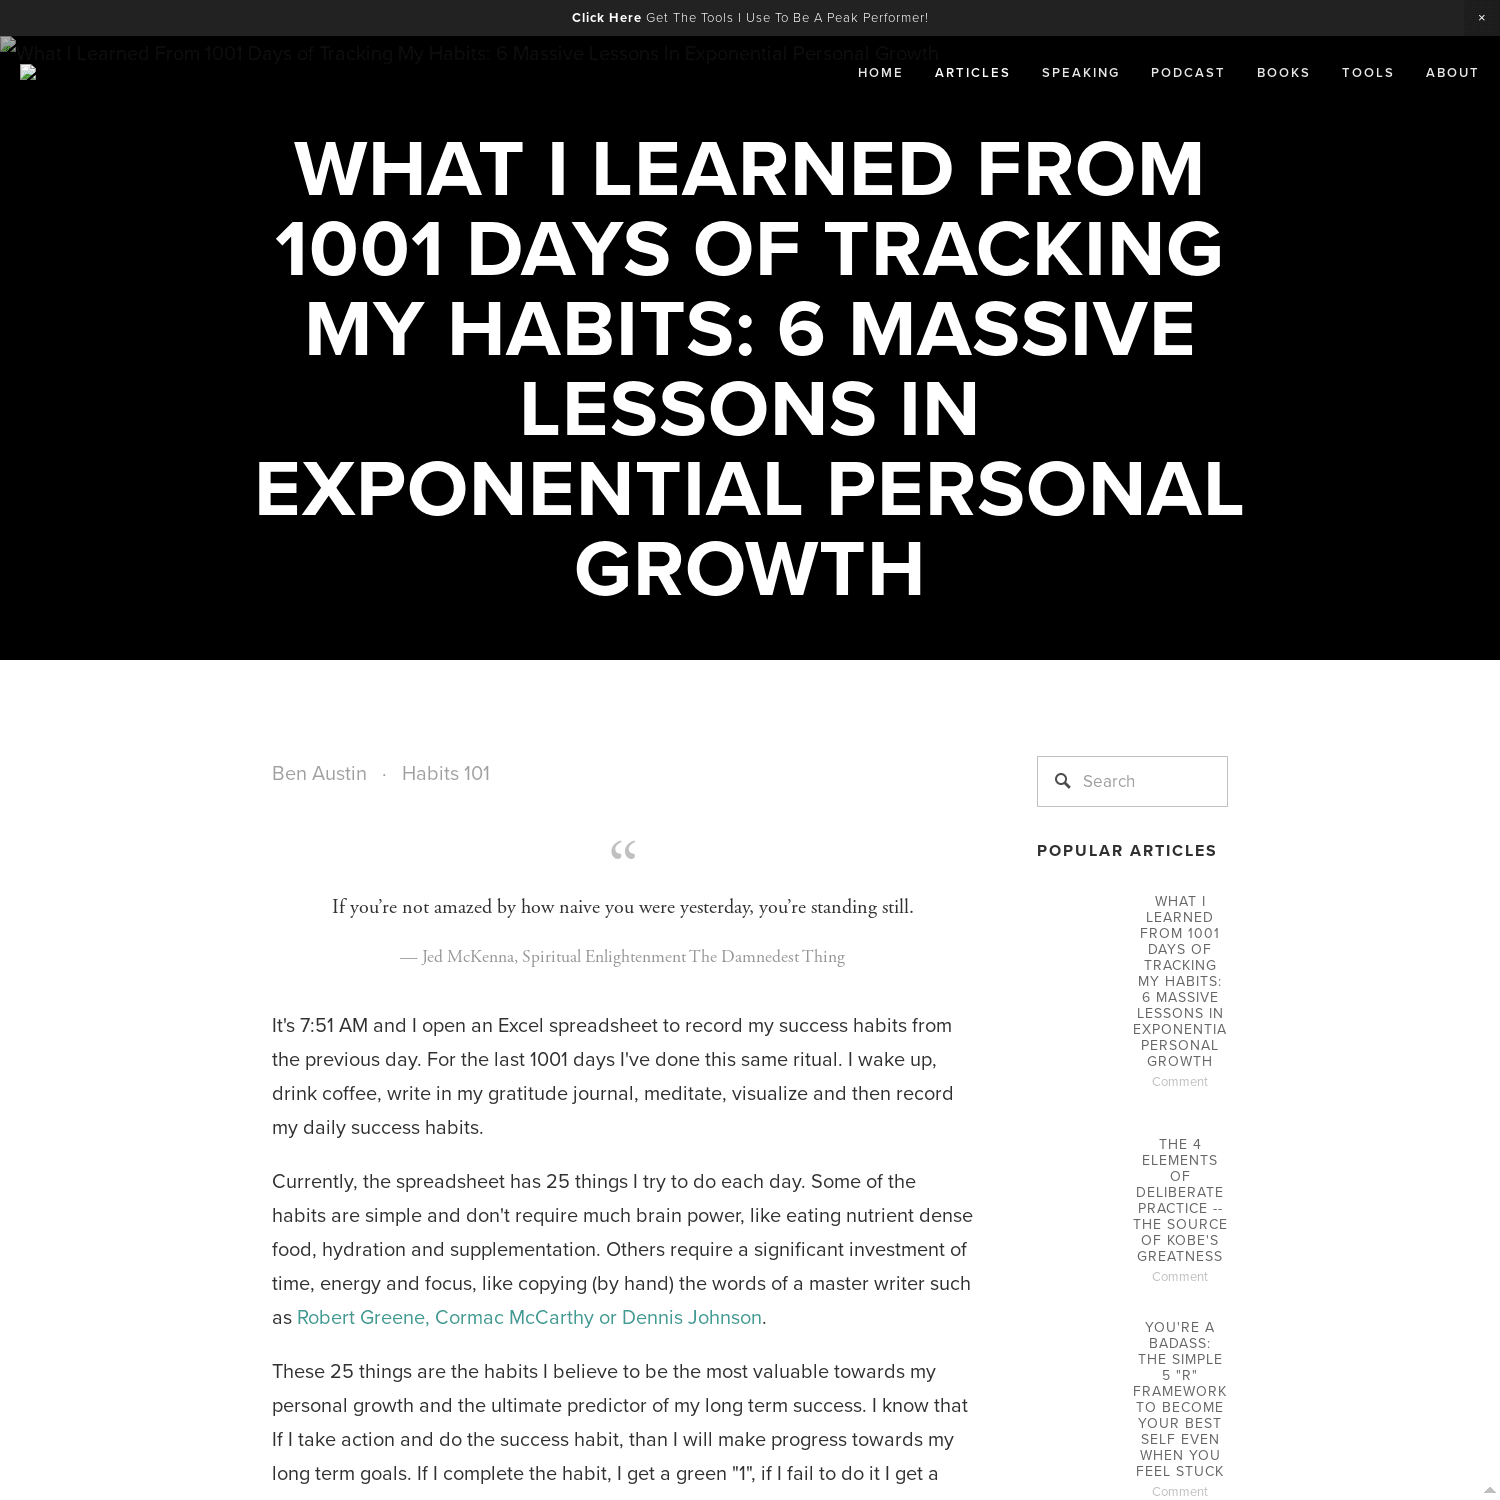 What I Learned From 1001 Days of Tracking My Habits: 6 Massive Lessons In Exponential Personal Growth